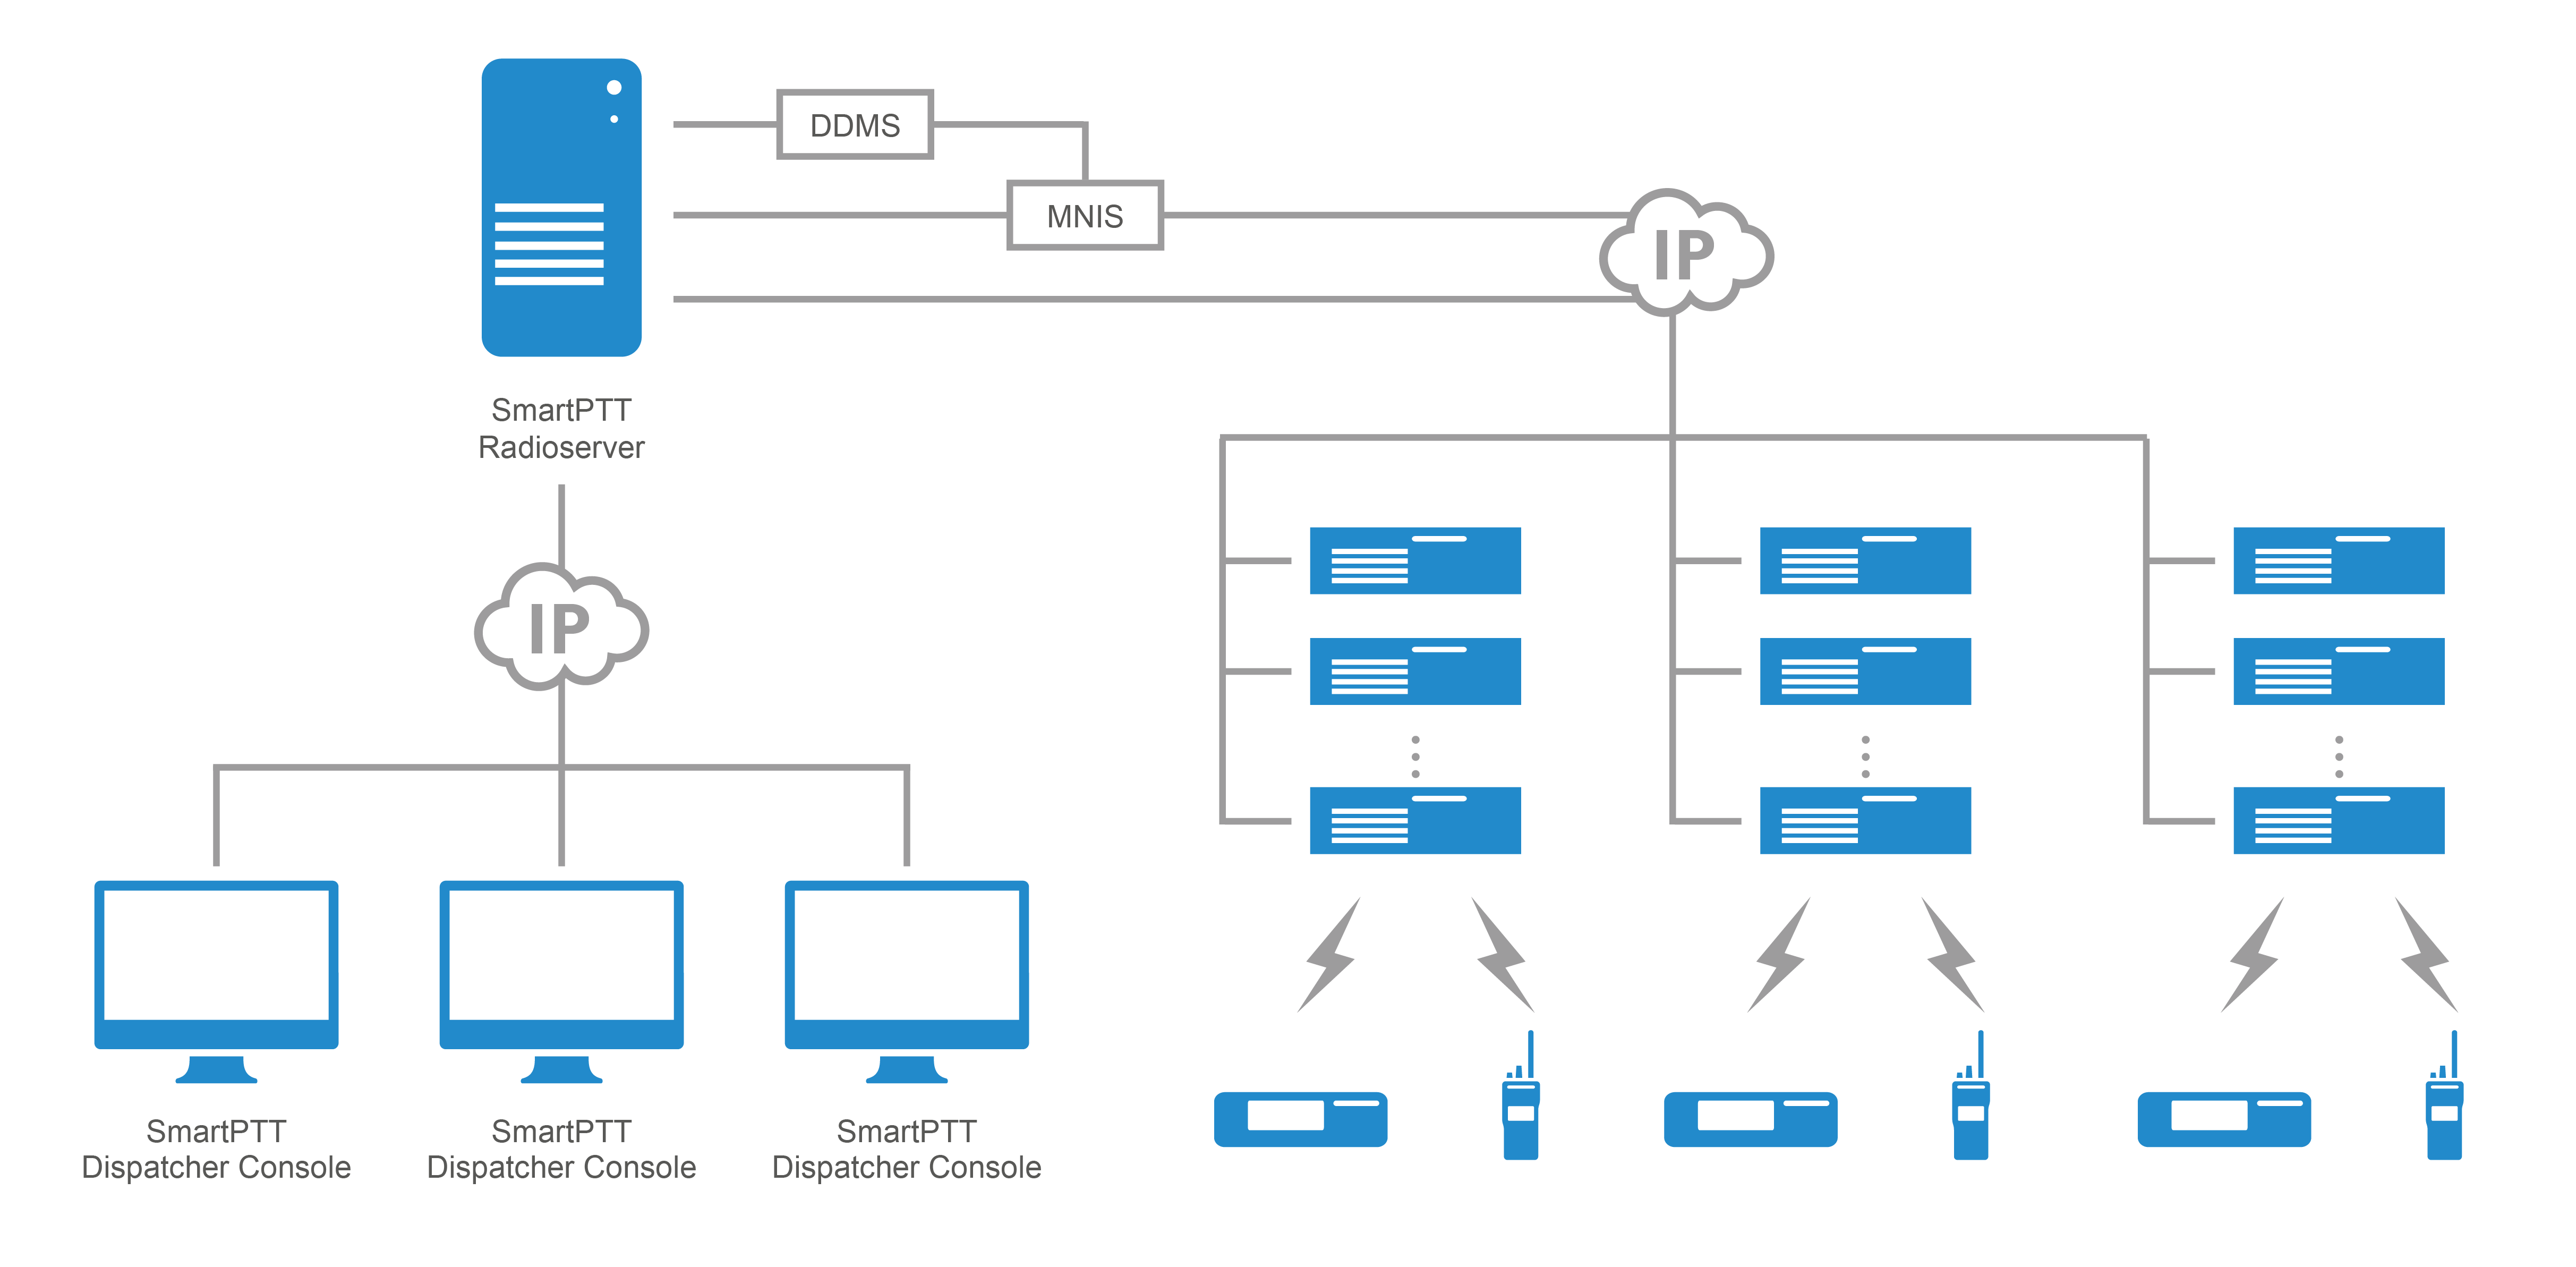 Dispatch Control over Linked Capacity Plus, Capacity Plus, IP Site Connect